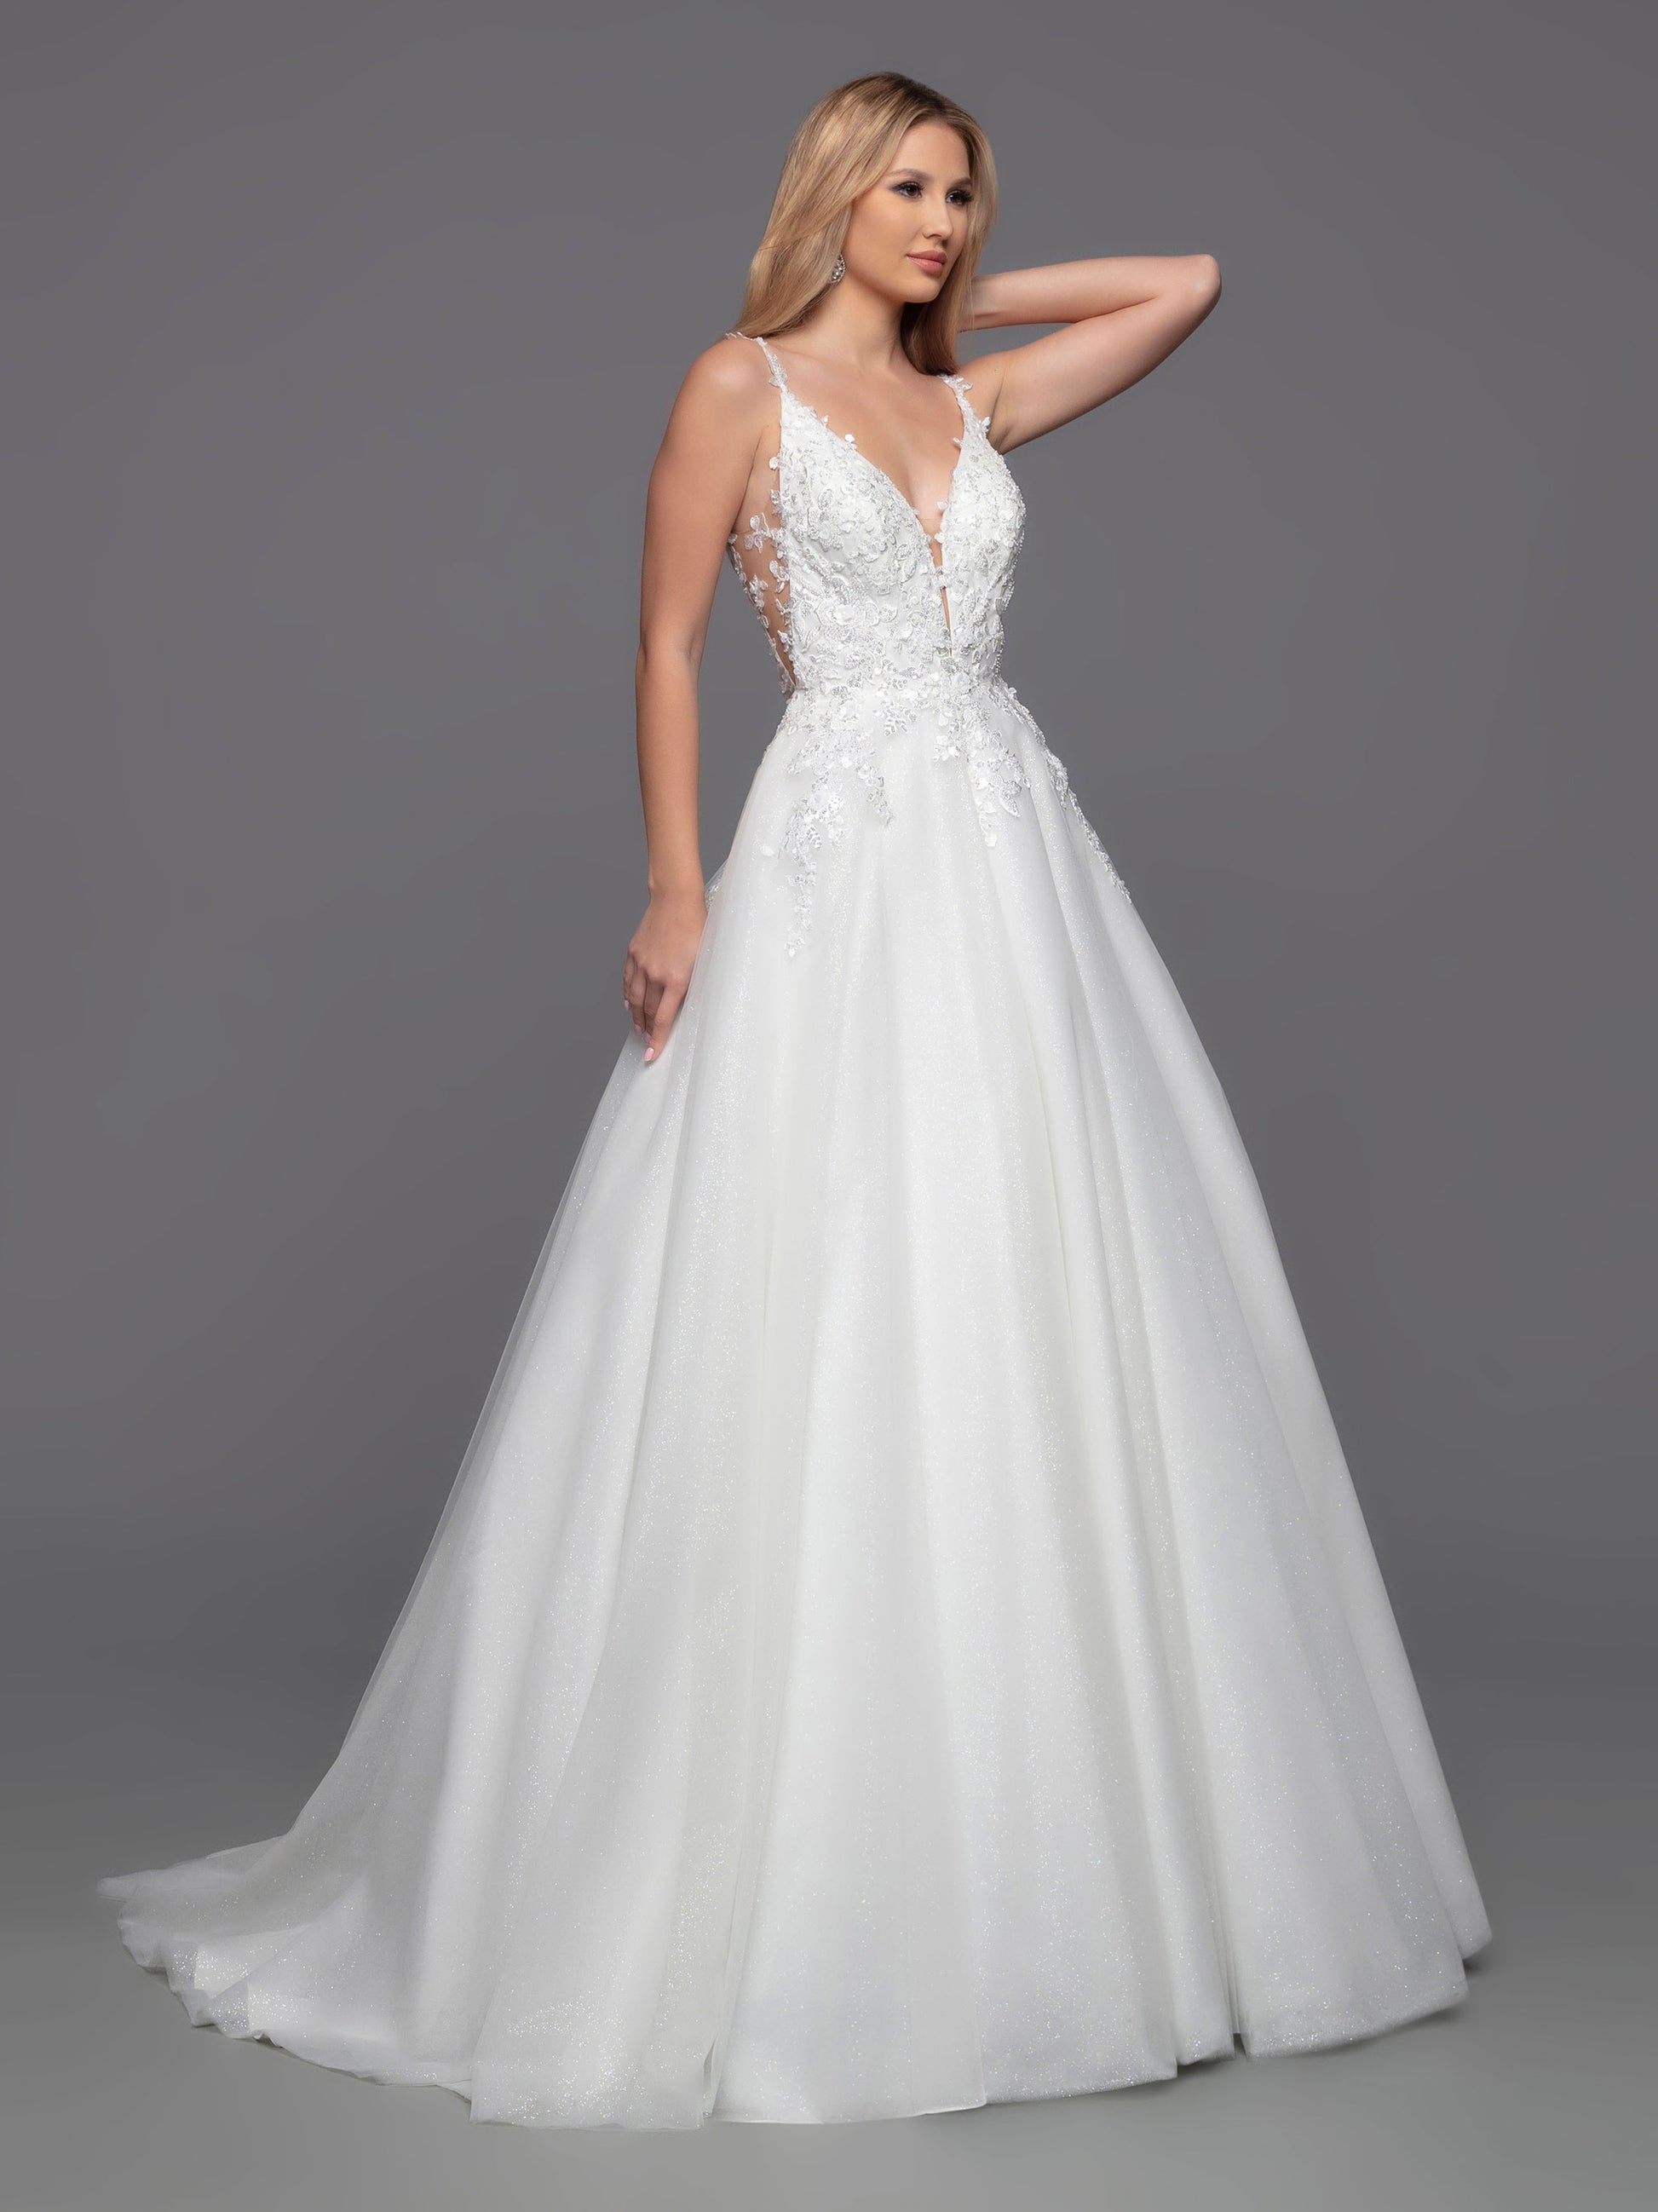 Davinci Bridal 50801 Long Shimmer Tulle Ballgown Sheer lace wedding dress Open Back is a timeless choice with a modern twist. This ball gown features a classic layered tulle skirt and a contemporary bodice with sheer sides, a low keyhole and covered button detail. The perfect combination of style and sophistication for any special occasion.  Sizes: 2-20  Colors: Ivory